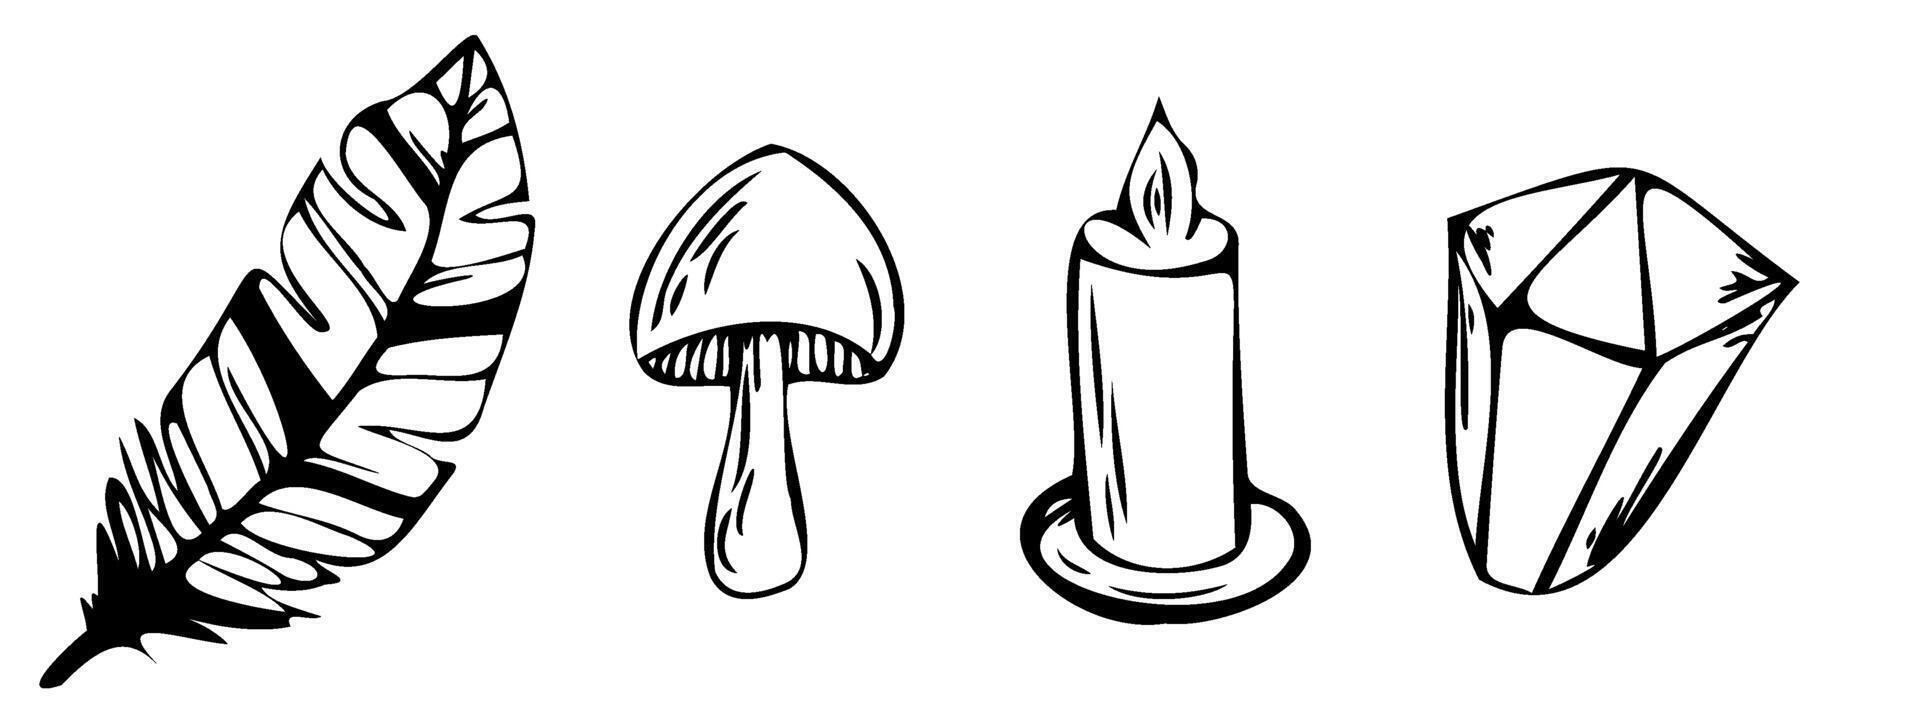 Mystic magic vector line elements. Contour minimalistic hand drawn doodle in black. mysterious feather, candle, crystal, mushroom. Outline set of elements for logo, tattoo, books, prints